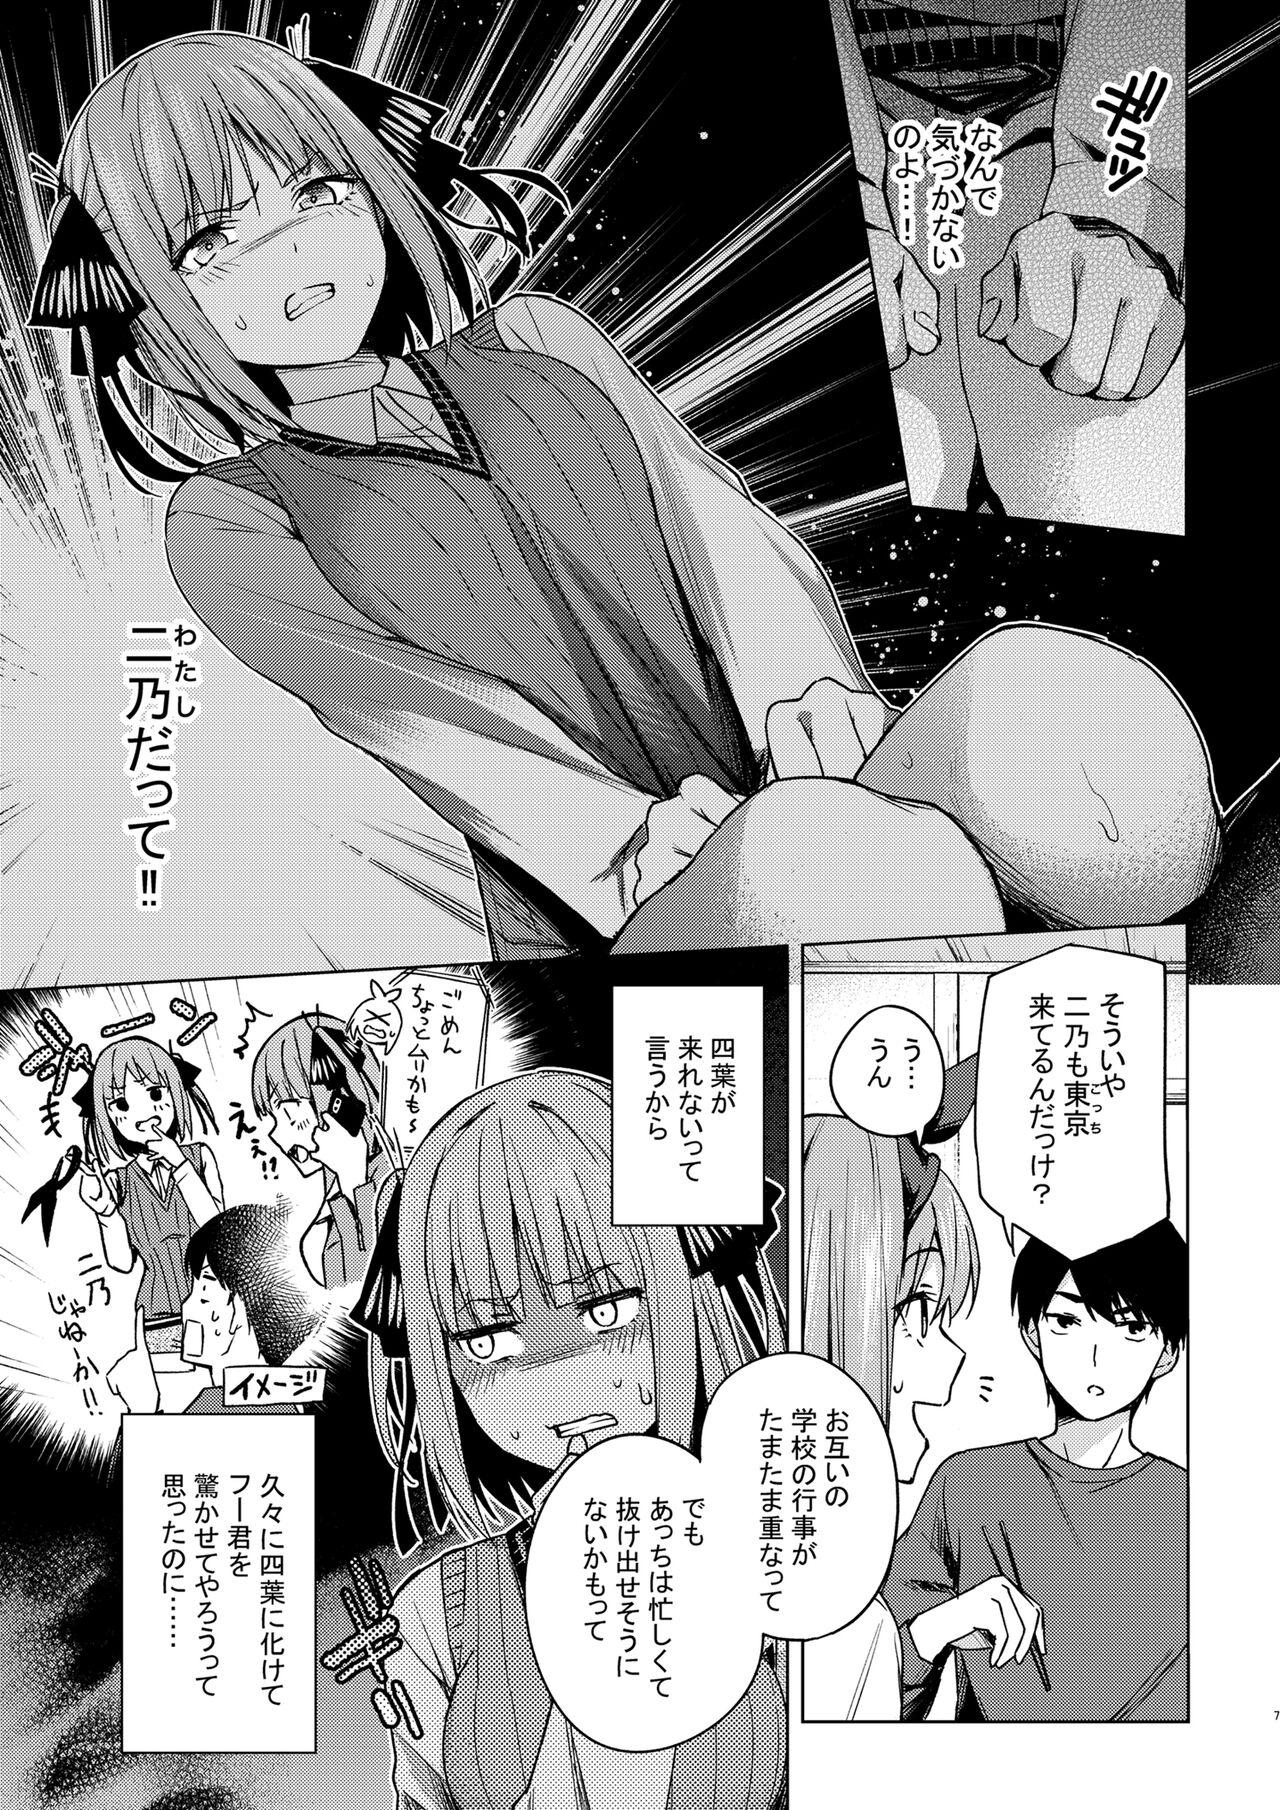 Family Roleplay Ichinen-go no itazura - Gotoubun no hanayome | the quintessential quintuplets American - Page 7